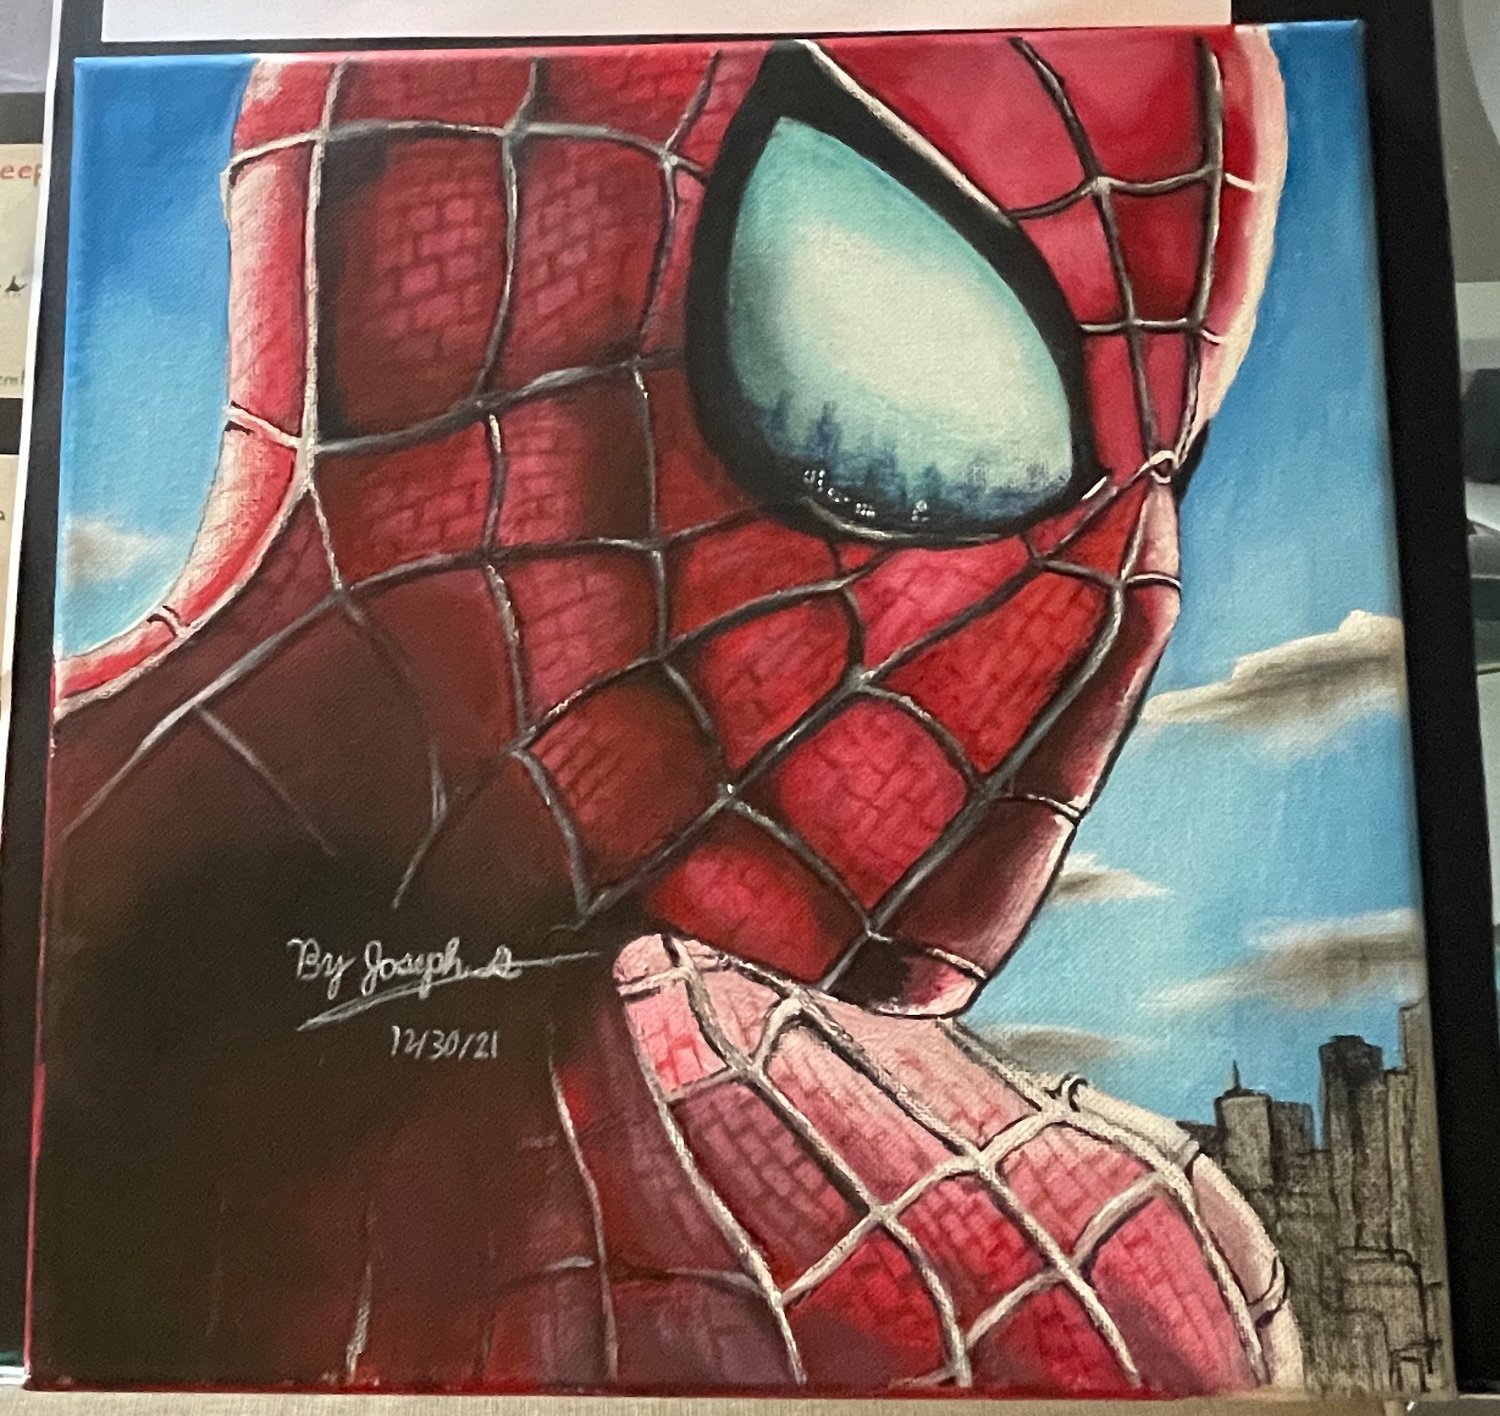 He is fond of blending media, and used pencil as well as paint in his depiction of Spider-Man.